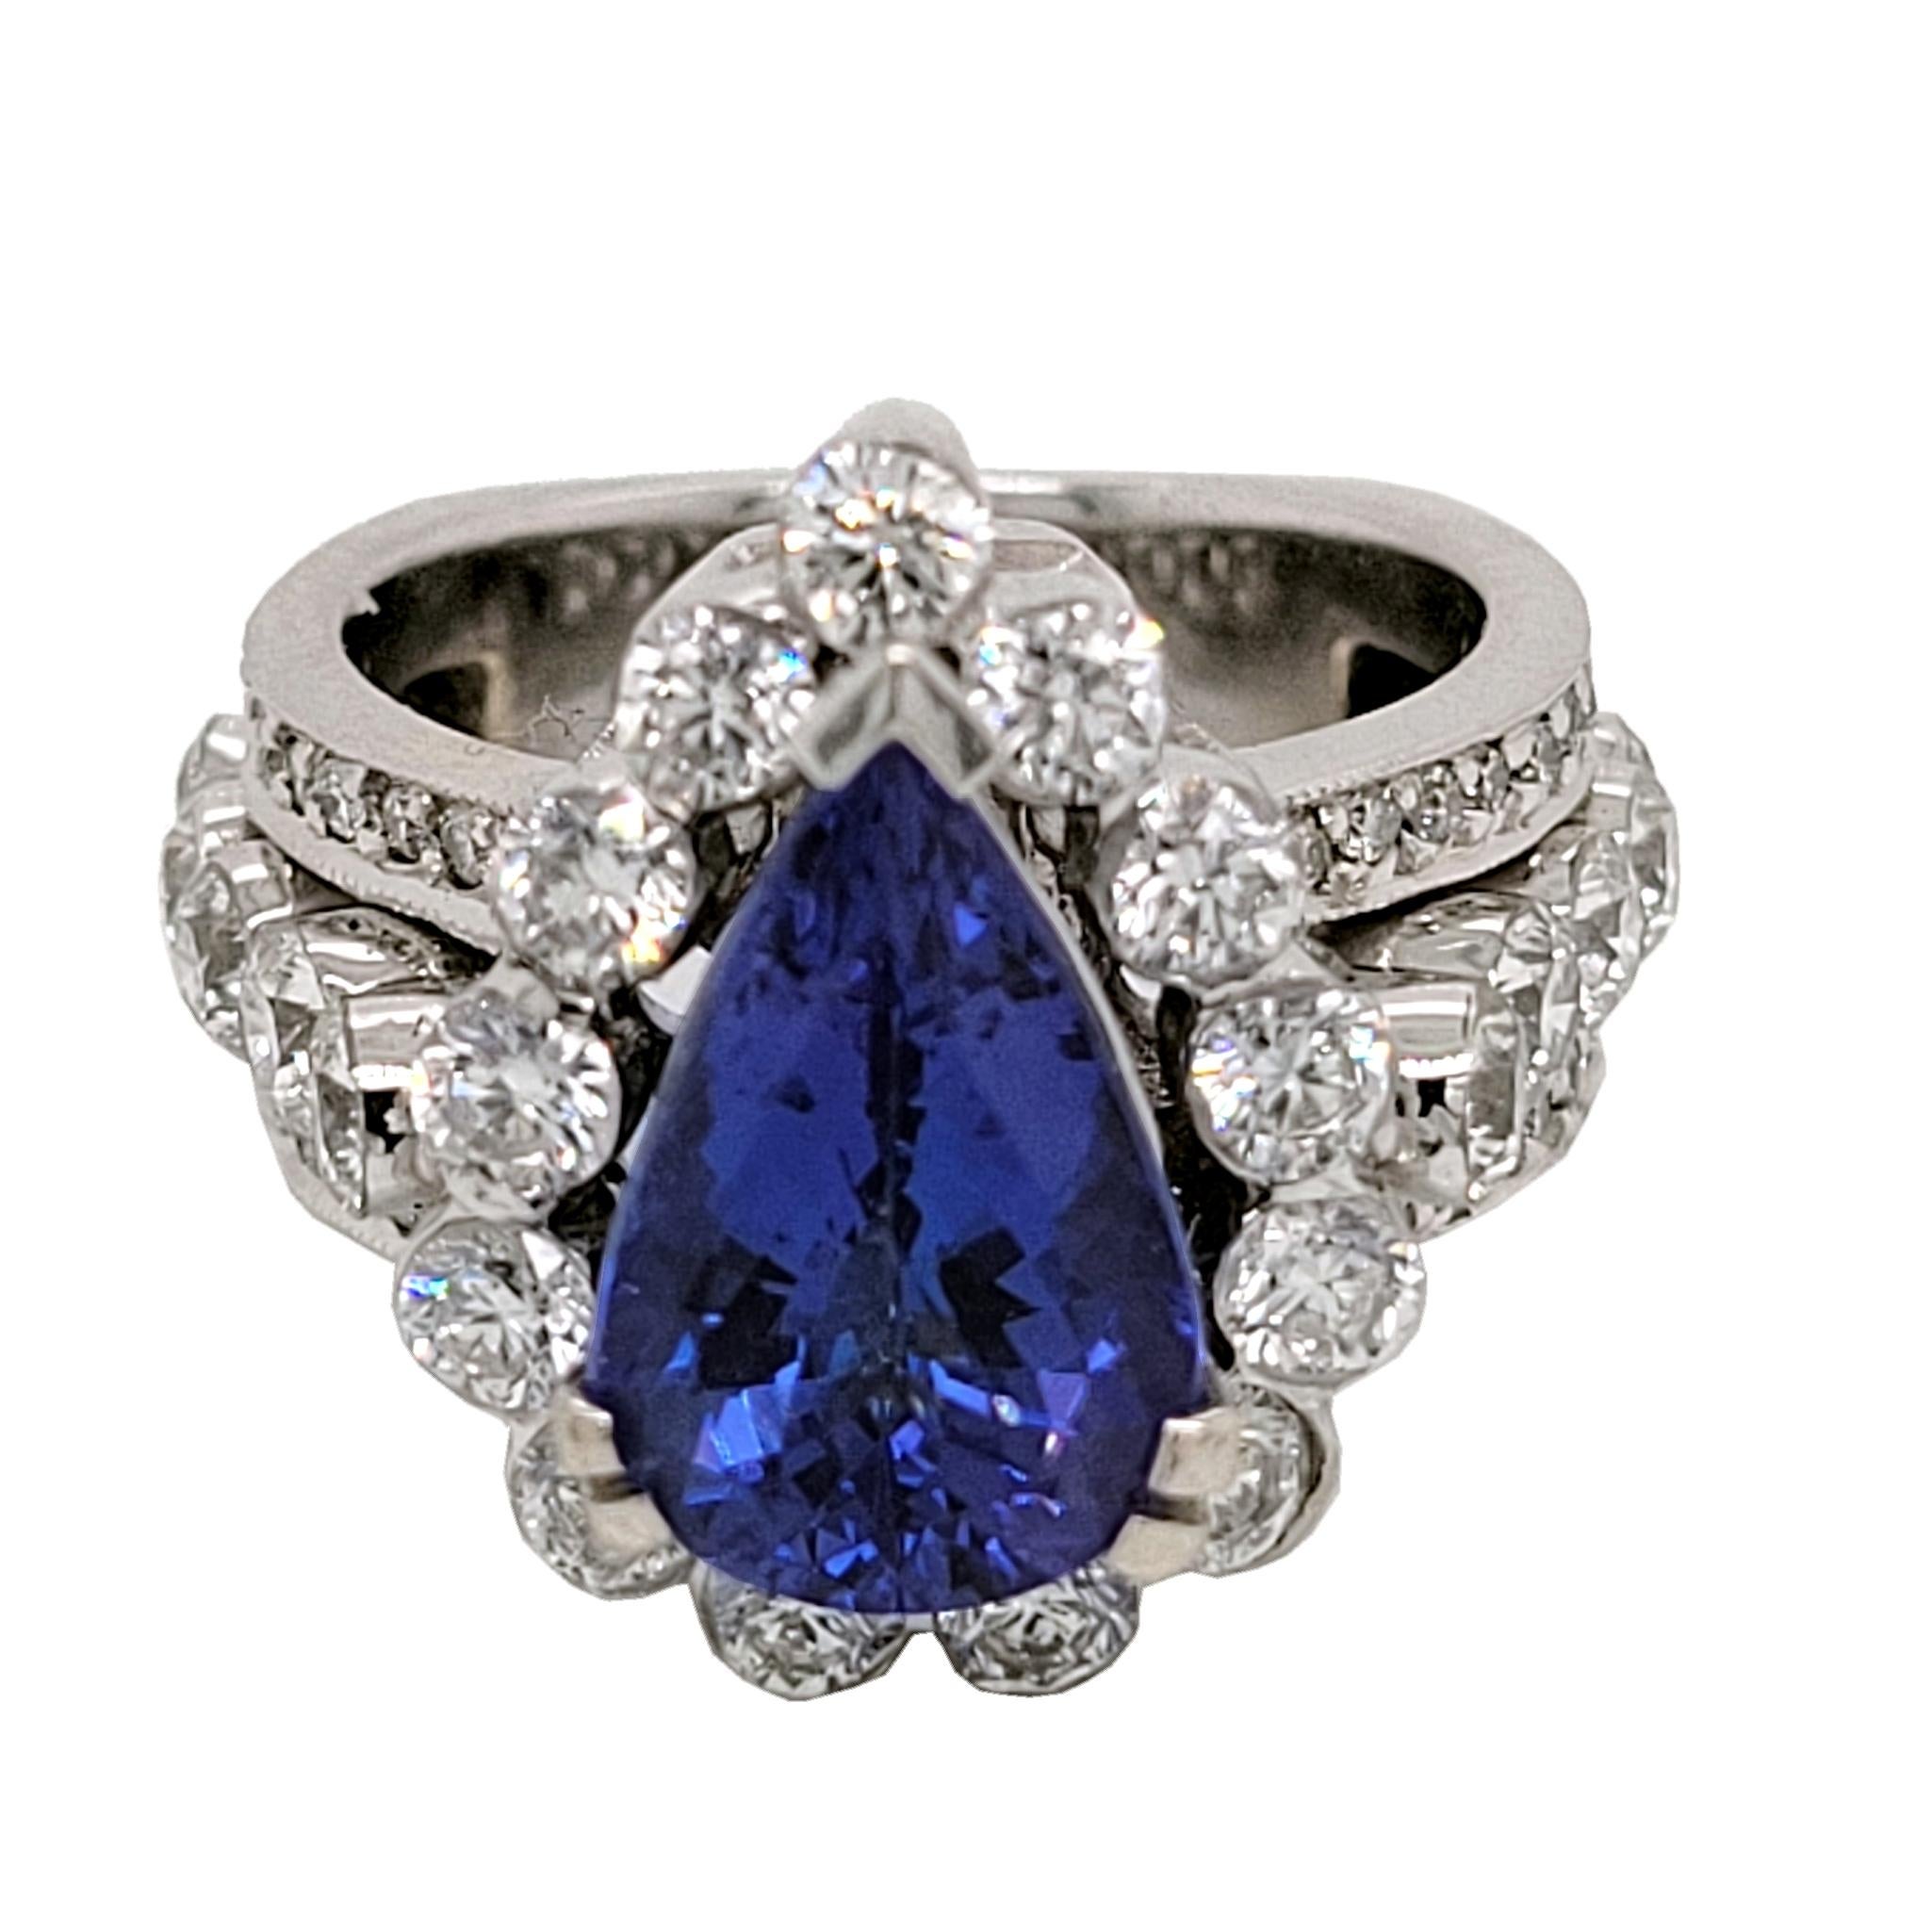 3.05 Carat Pear Shape Tanzanite 18 Karat Engagement Ring with Halo In New Condition For Sale In Los Angeles, CA